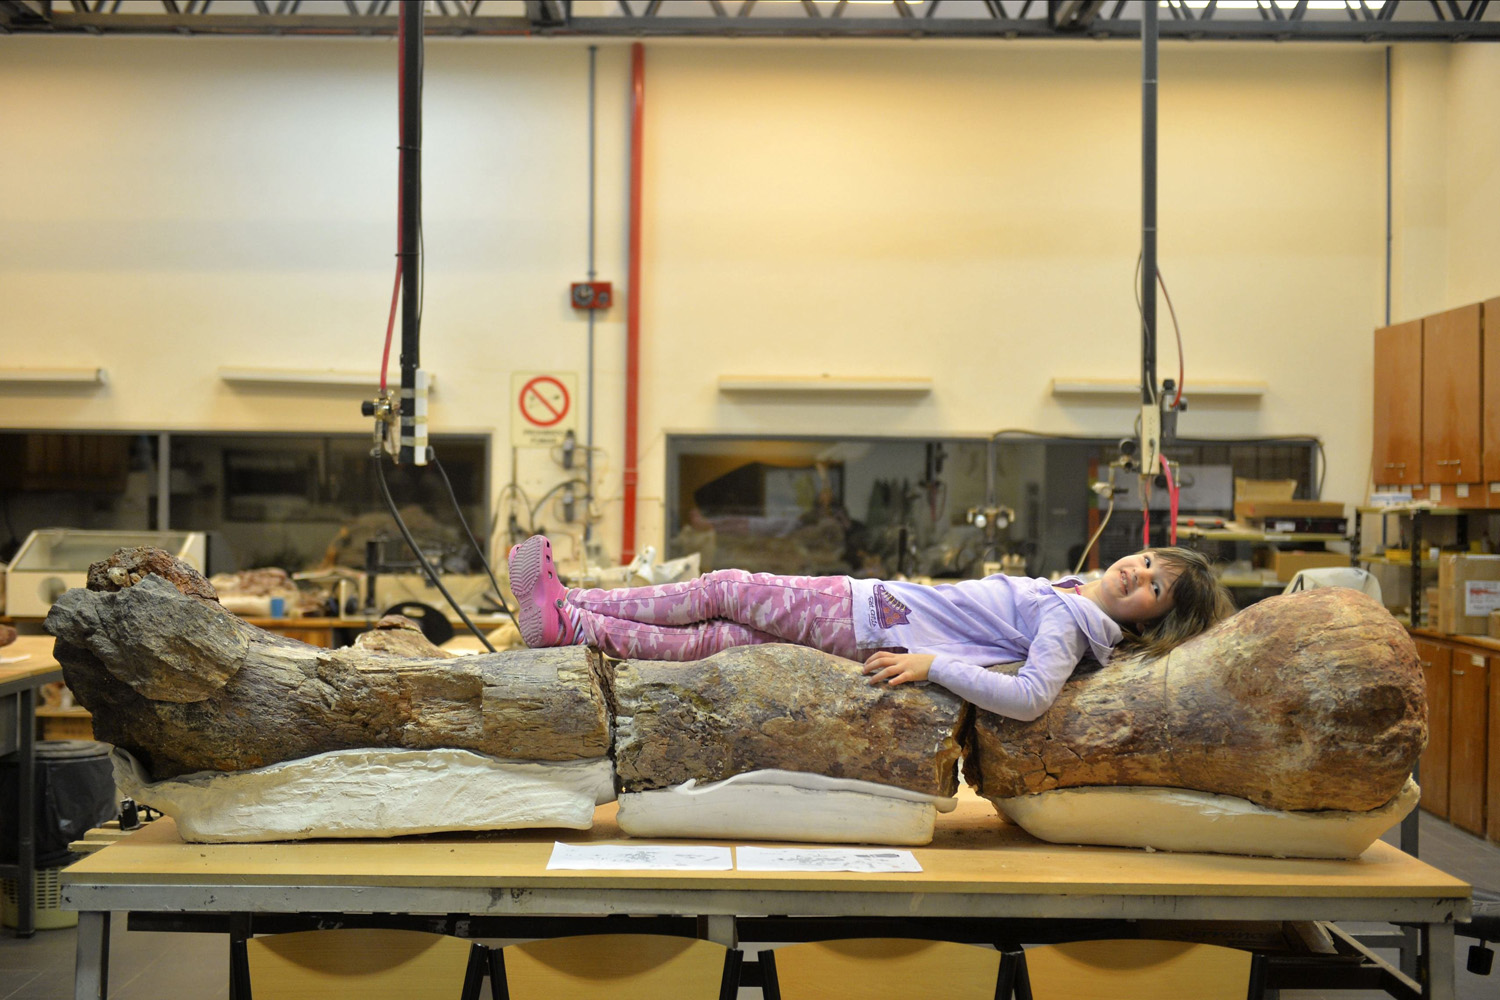 A young girl named Marlene lies over the original fossilized femur of a dinosaur displayed on exhibition at the Egidio Feruglio Museum in the Argentina's Patagonian city of Trelew on May 18, 2014.